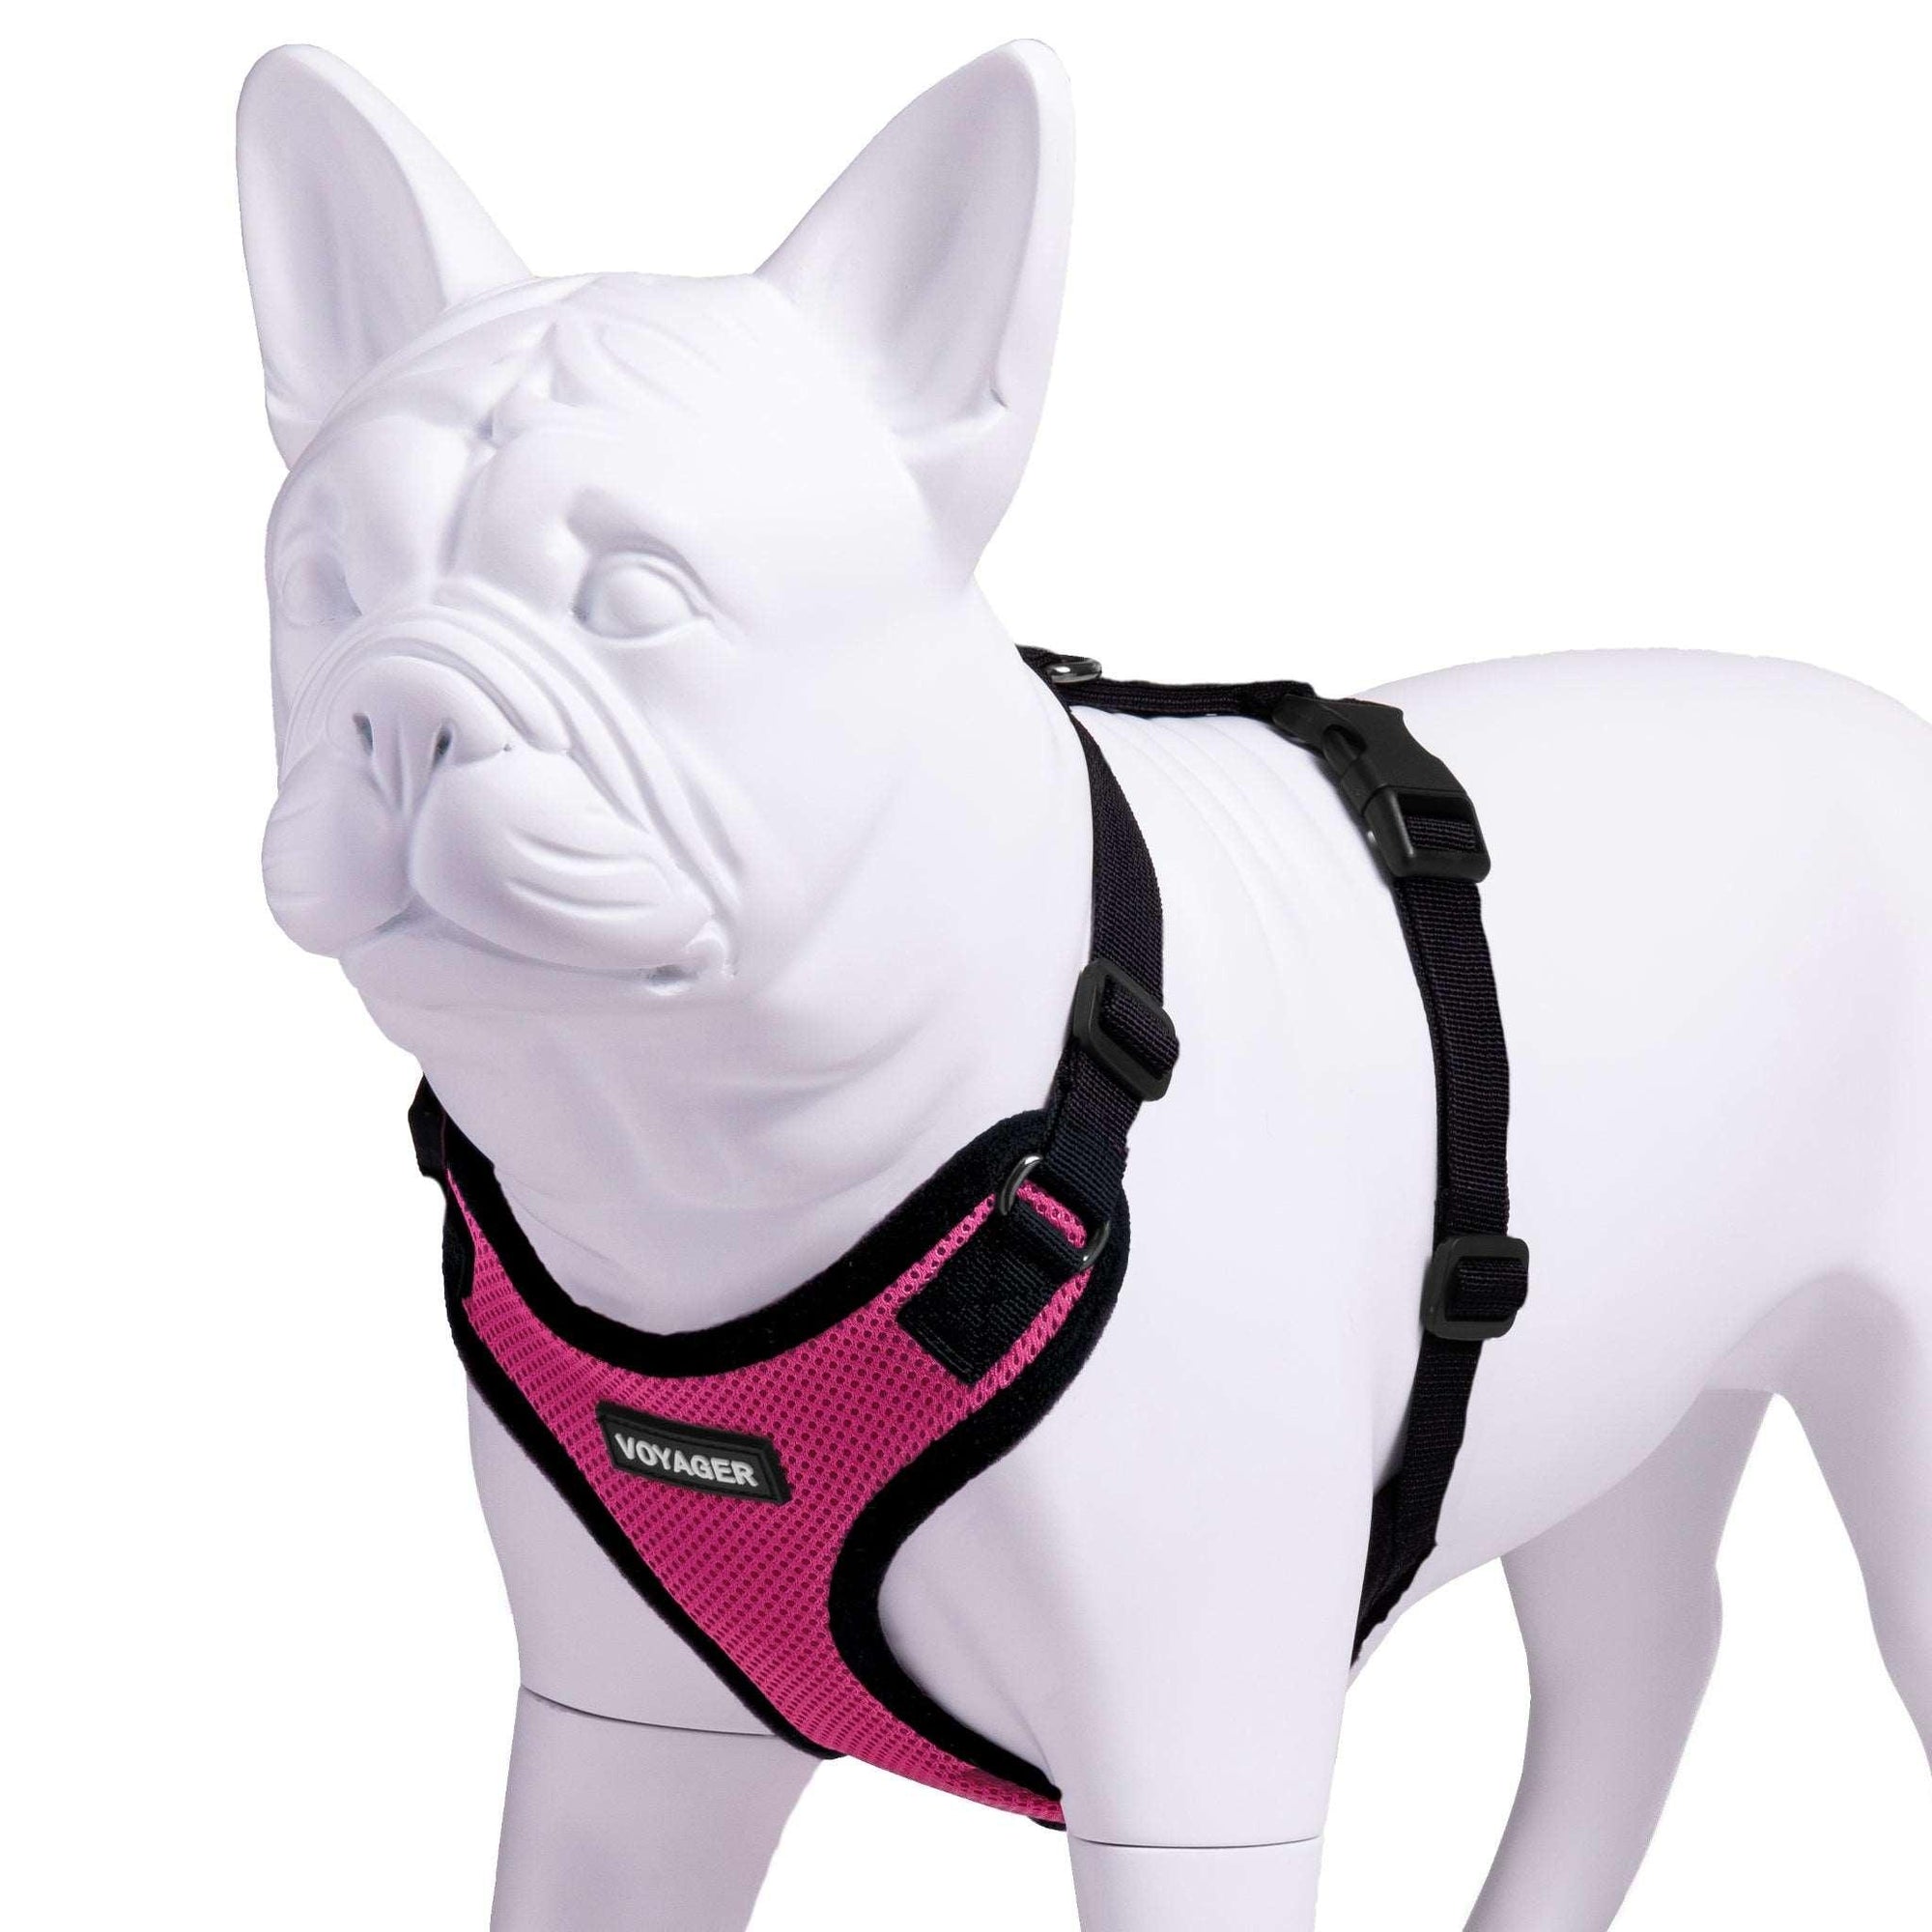 VOYAGER Step-In Lock Dog Harness in Fuchsia with Black Trim and Webbing - Expanded